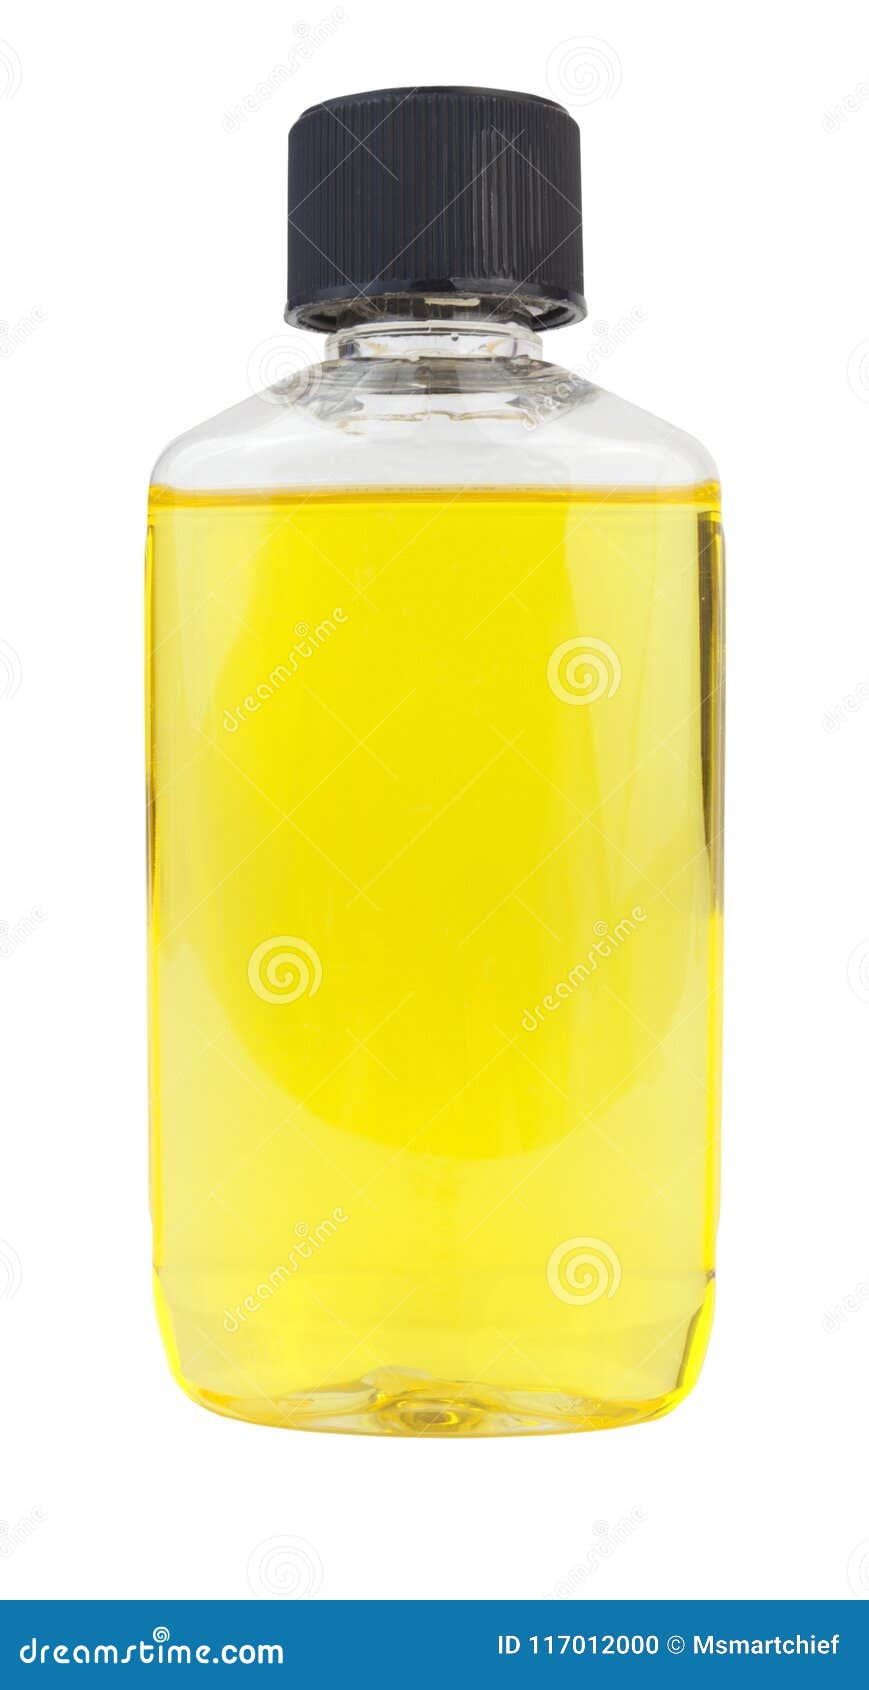 Download Transparent Bottle With Yellow Liquid Stock Photo Image Of Yellow Black 117012000 Yellowimages Mockups